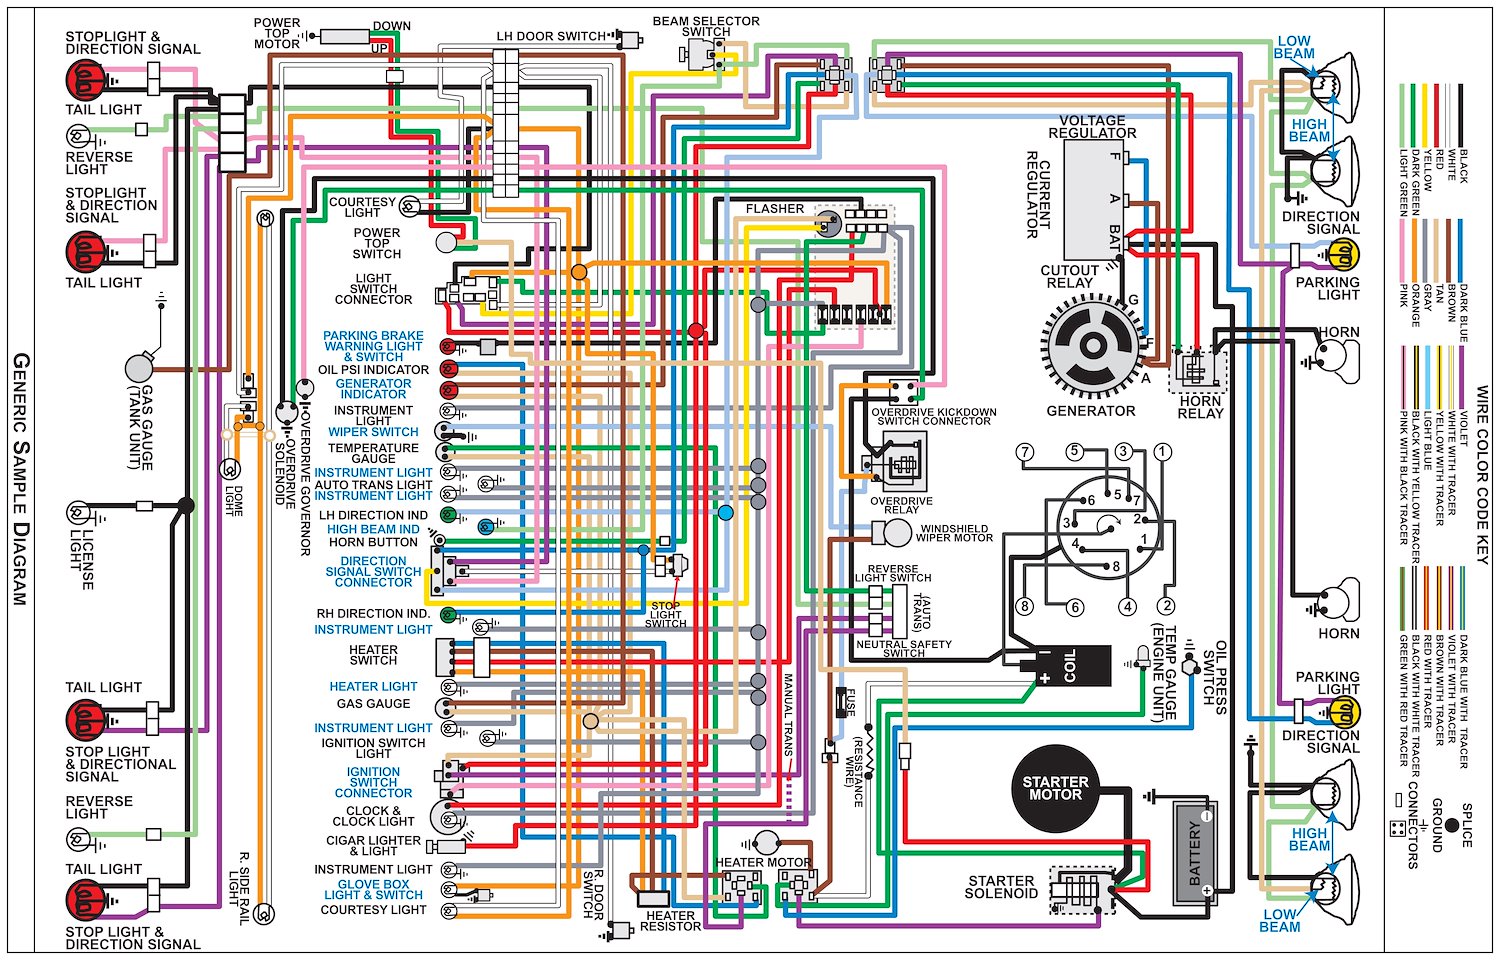 Wiring Diagram for 1974 Dodge Charger with Rallye Dash, 11 in x 17 in., Laminated